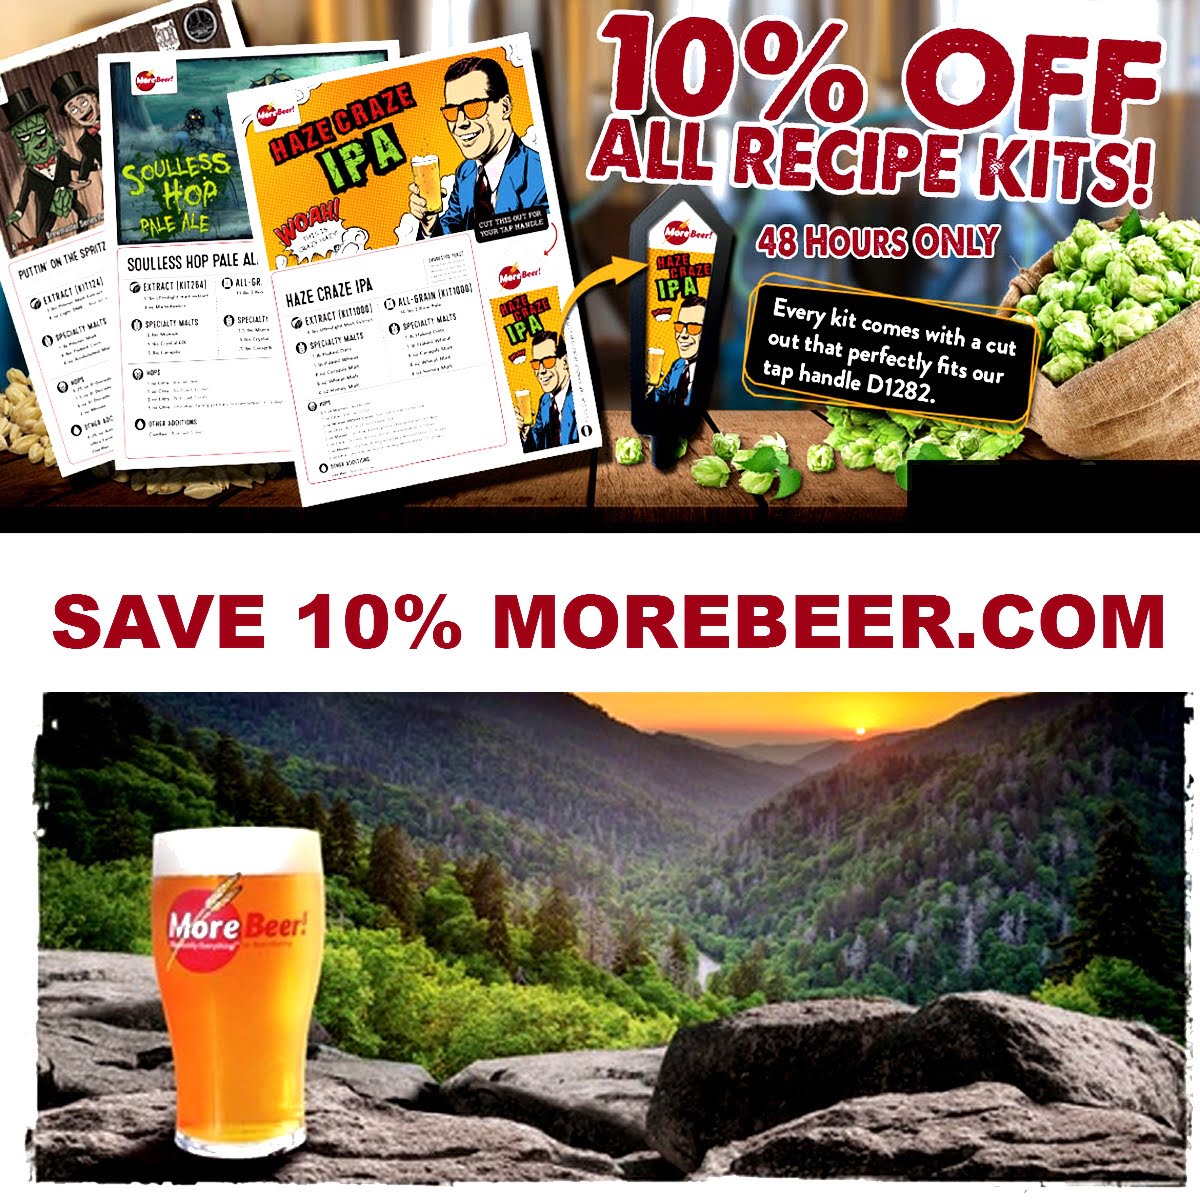 Save 10% On Home Brewing Beer Kits With This NorthernBrewer.com Promo Code